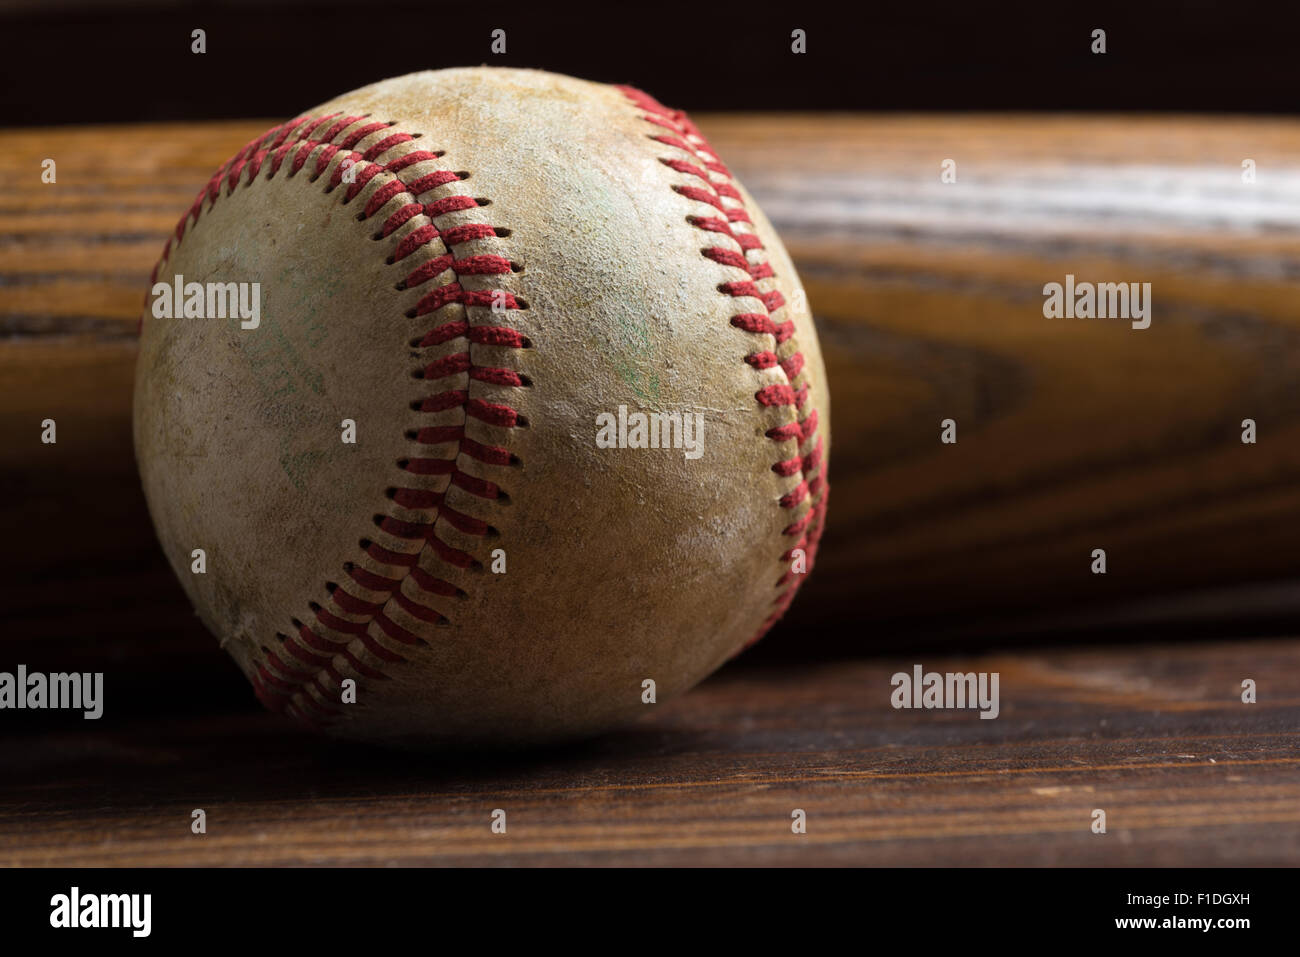 Baseball equipment: wooden bat and ball on a wood plank or bench background Stock Photo